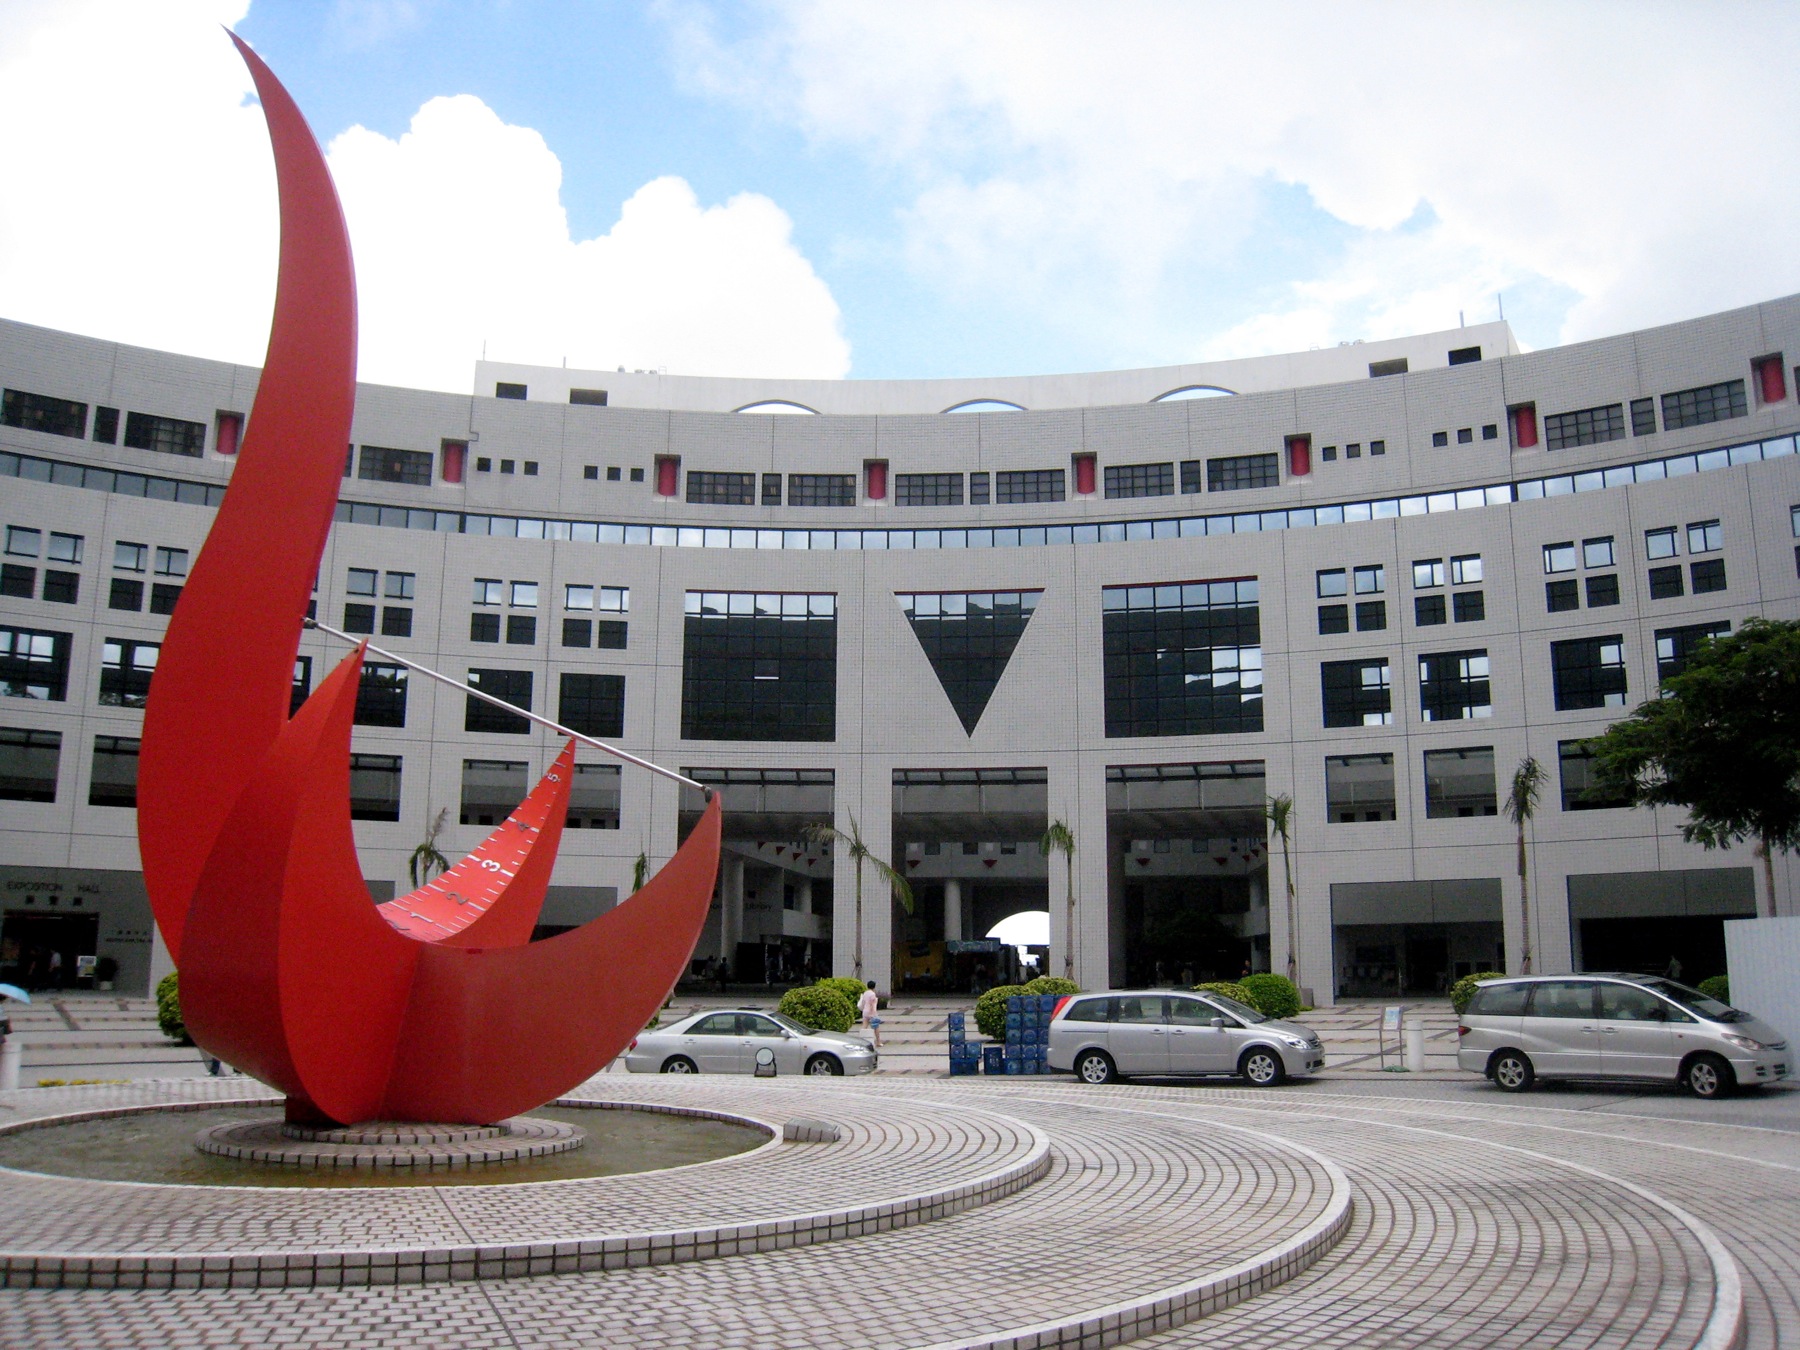 Hong Kong University of Science and Technology to Create a Metaverse Campus